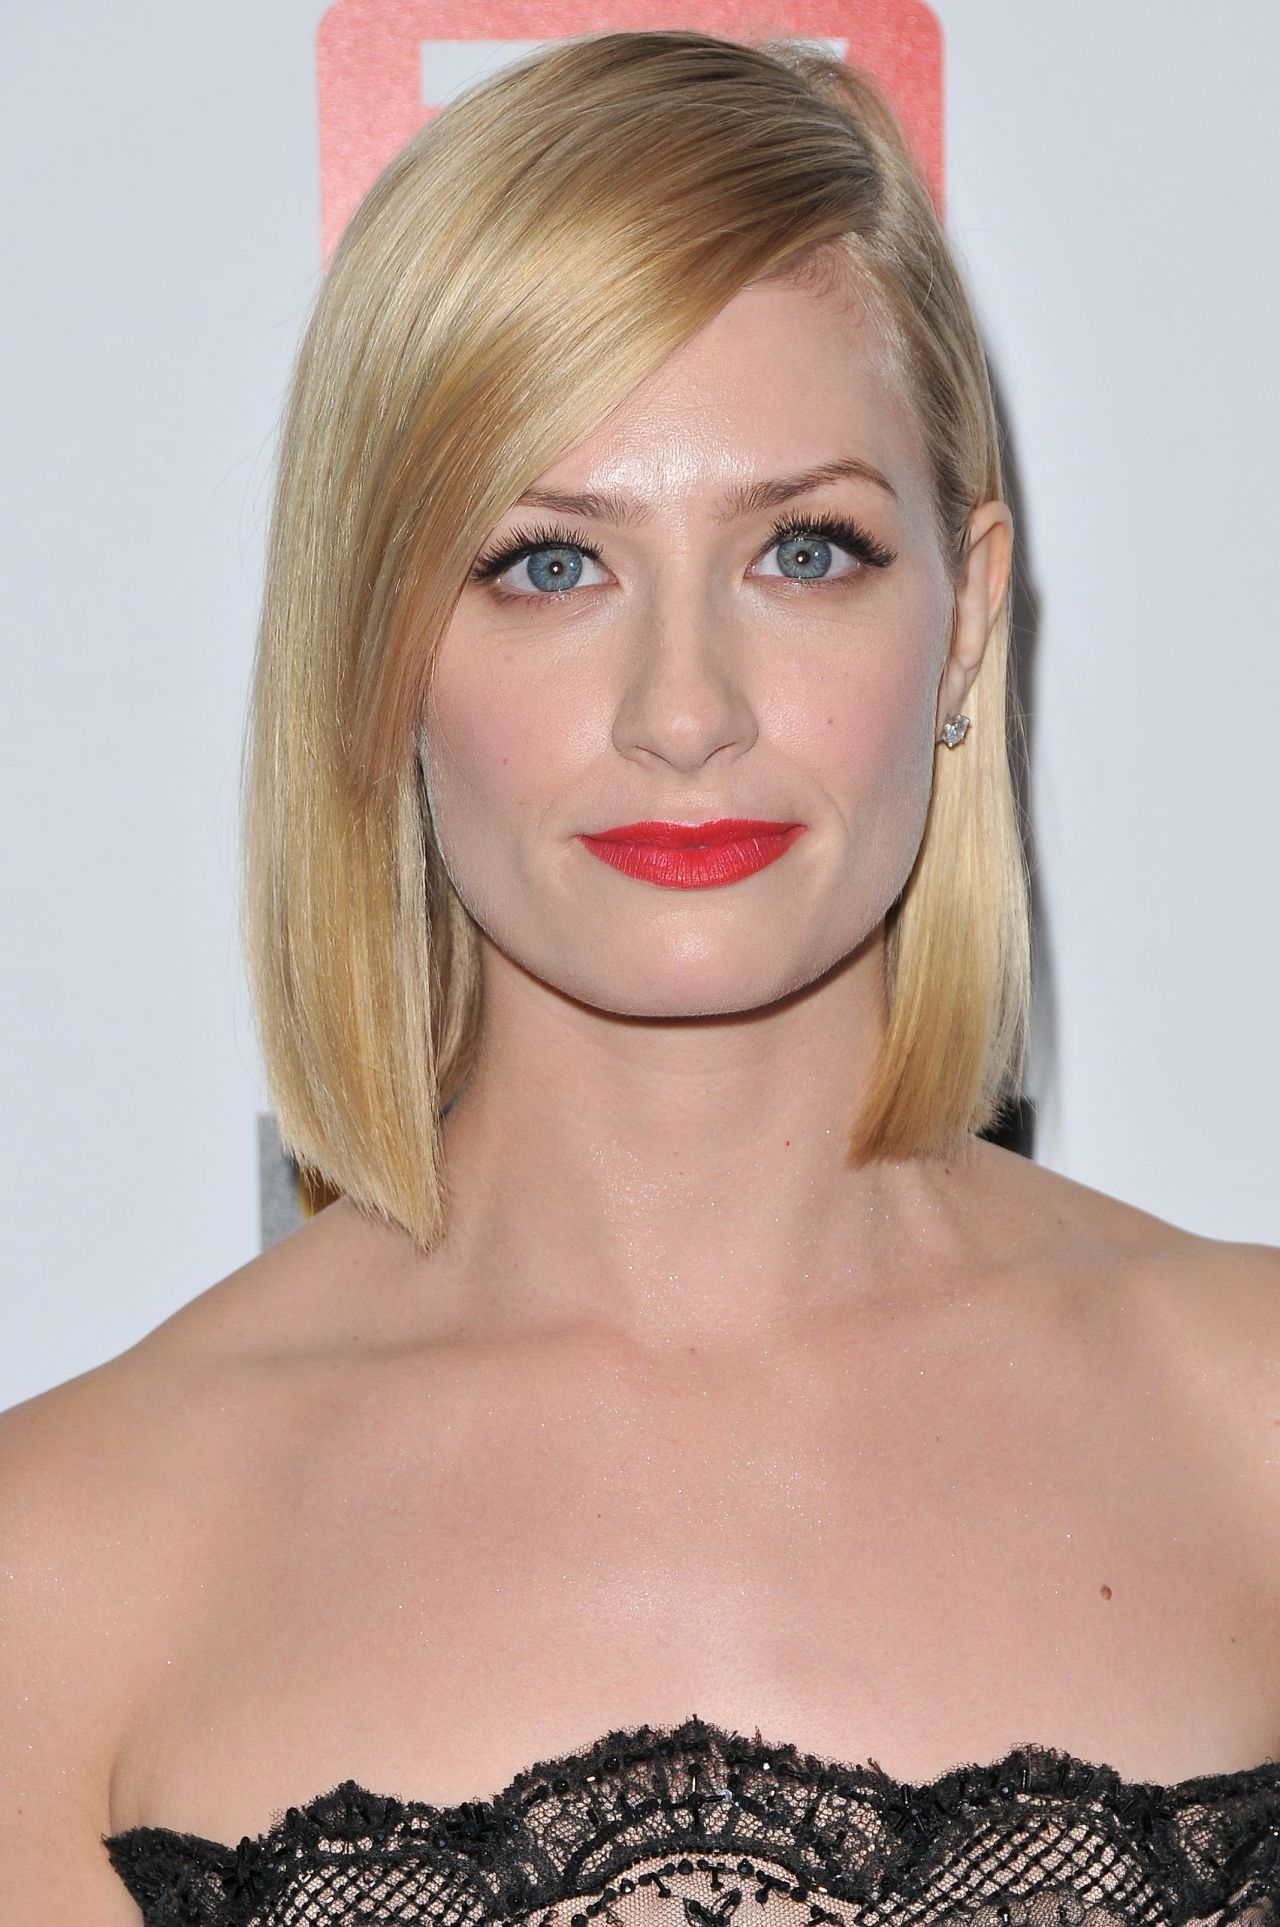 chelsea eary recommends Beth Behrs Naked Pics